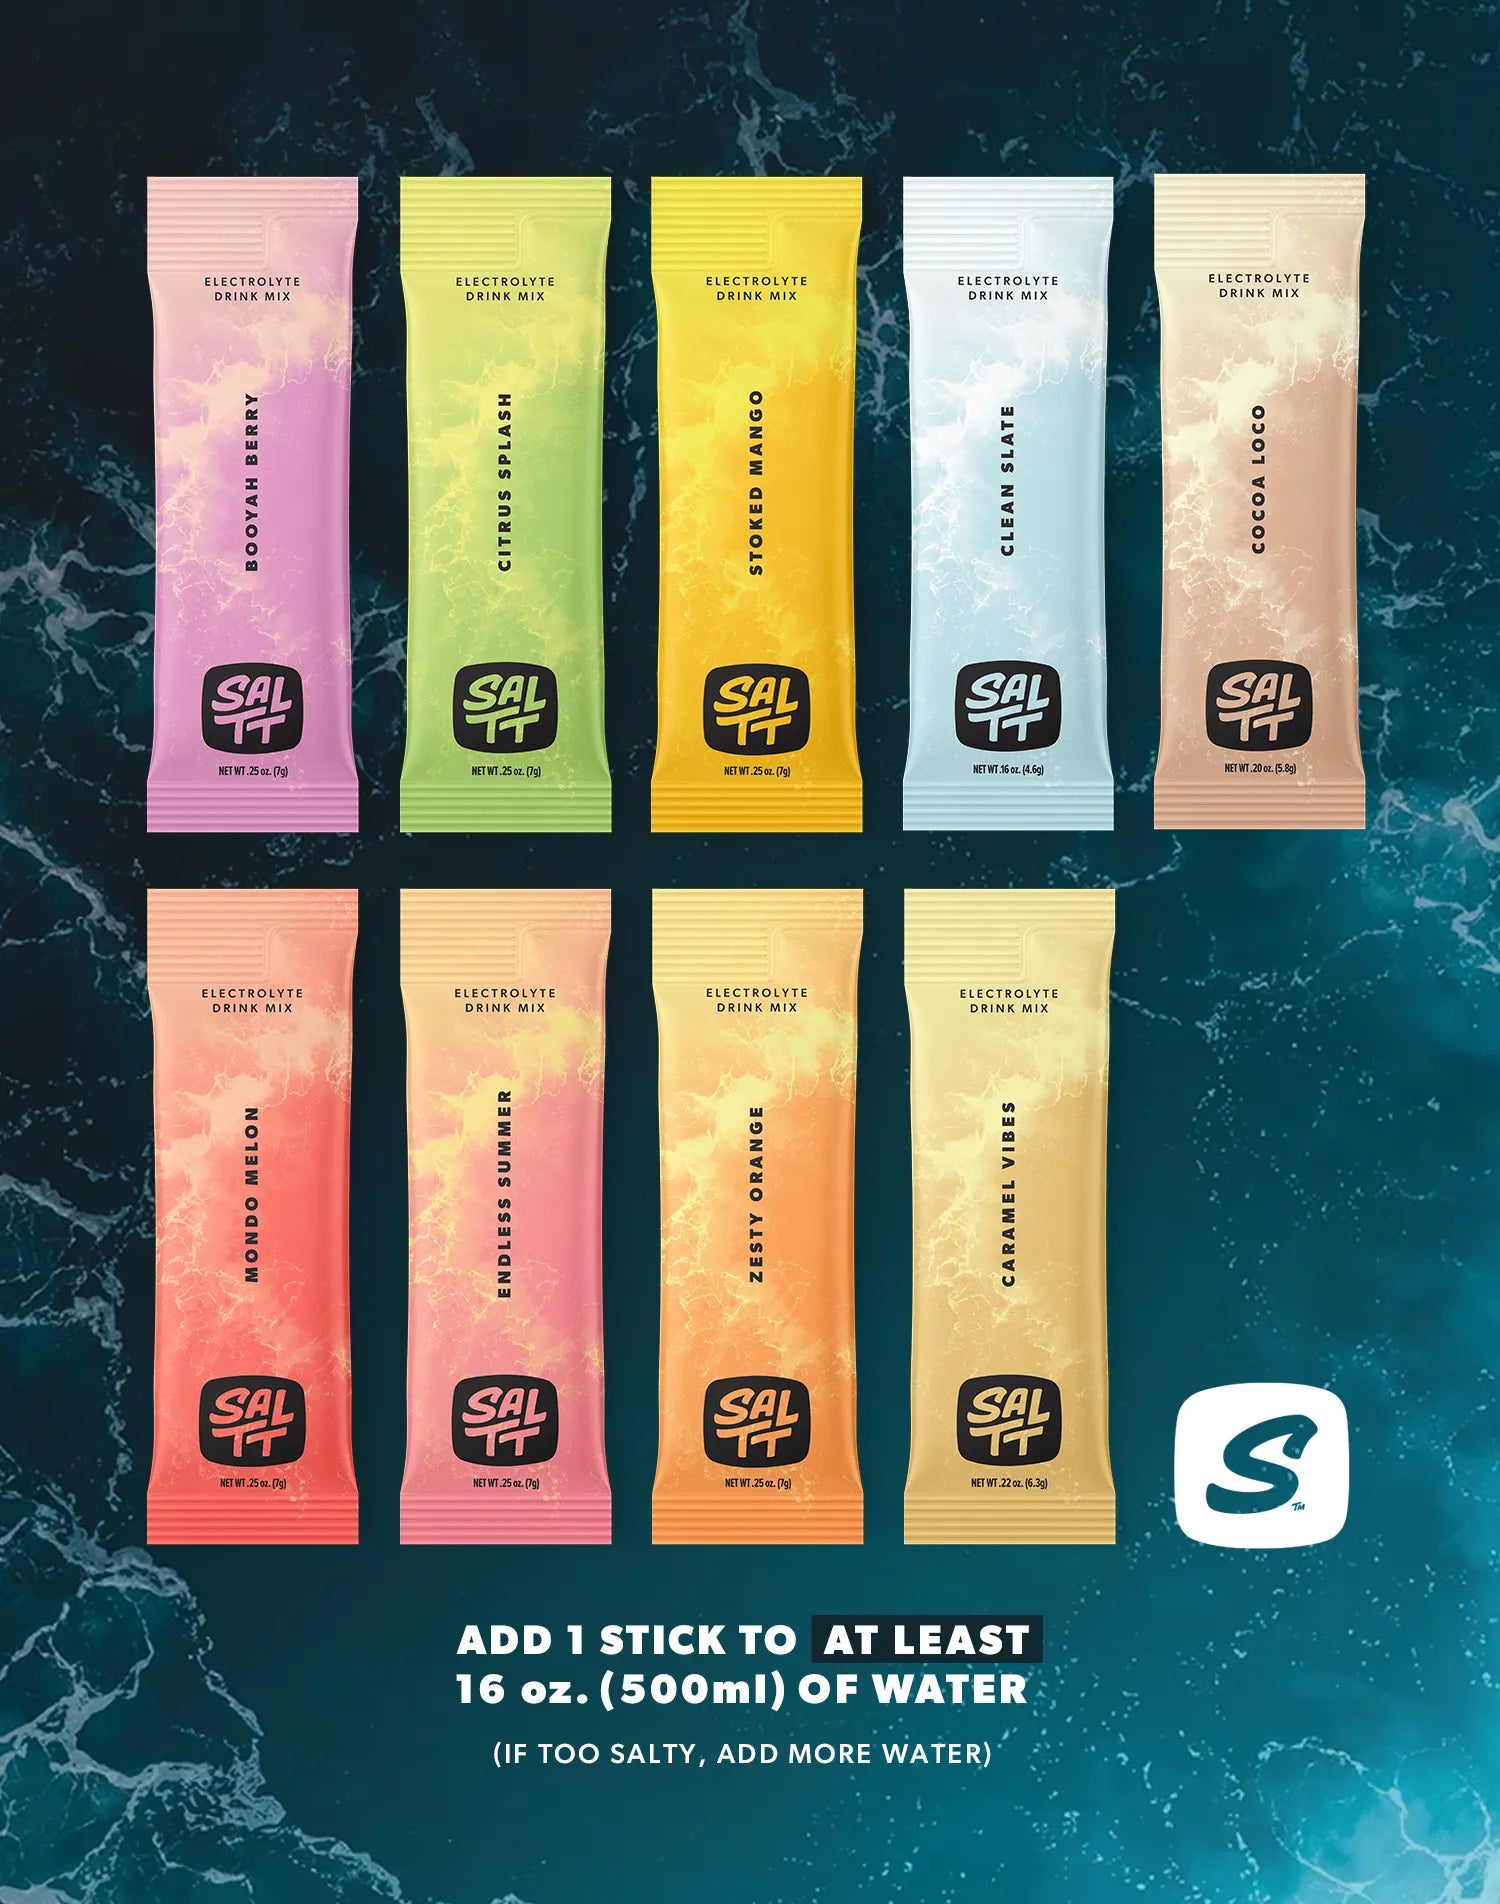 30 stick All The Things Variety Pack. 3 Booyah Berry, 6 Citrus Splash, 3 Stoked Mango, 3 Clean Slate, 3 Cocoa Loco, 3 Mondo Melon, 3 Endless Summer, 3 Zesty Orange, 3 Caramel Vibes. Add 1 stick to at least 16 oz. of water. If too salty, add more water.